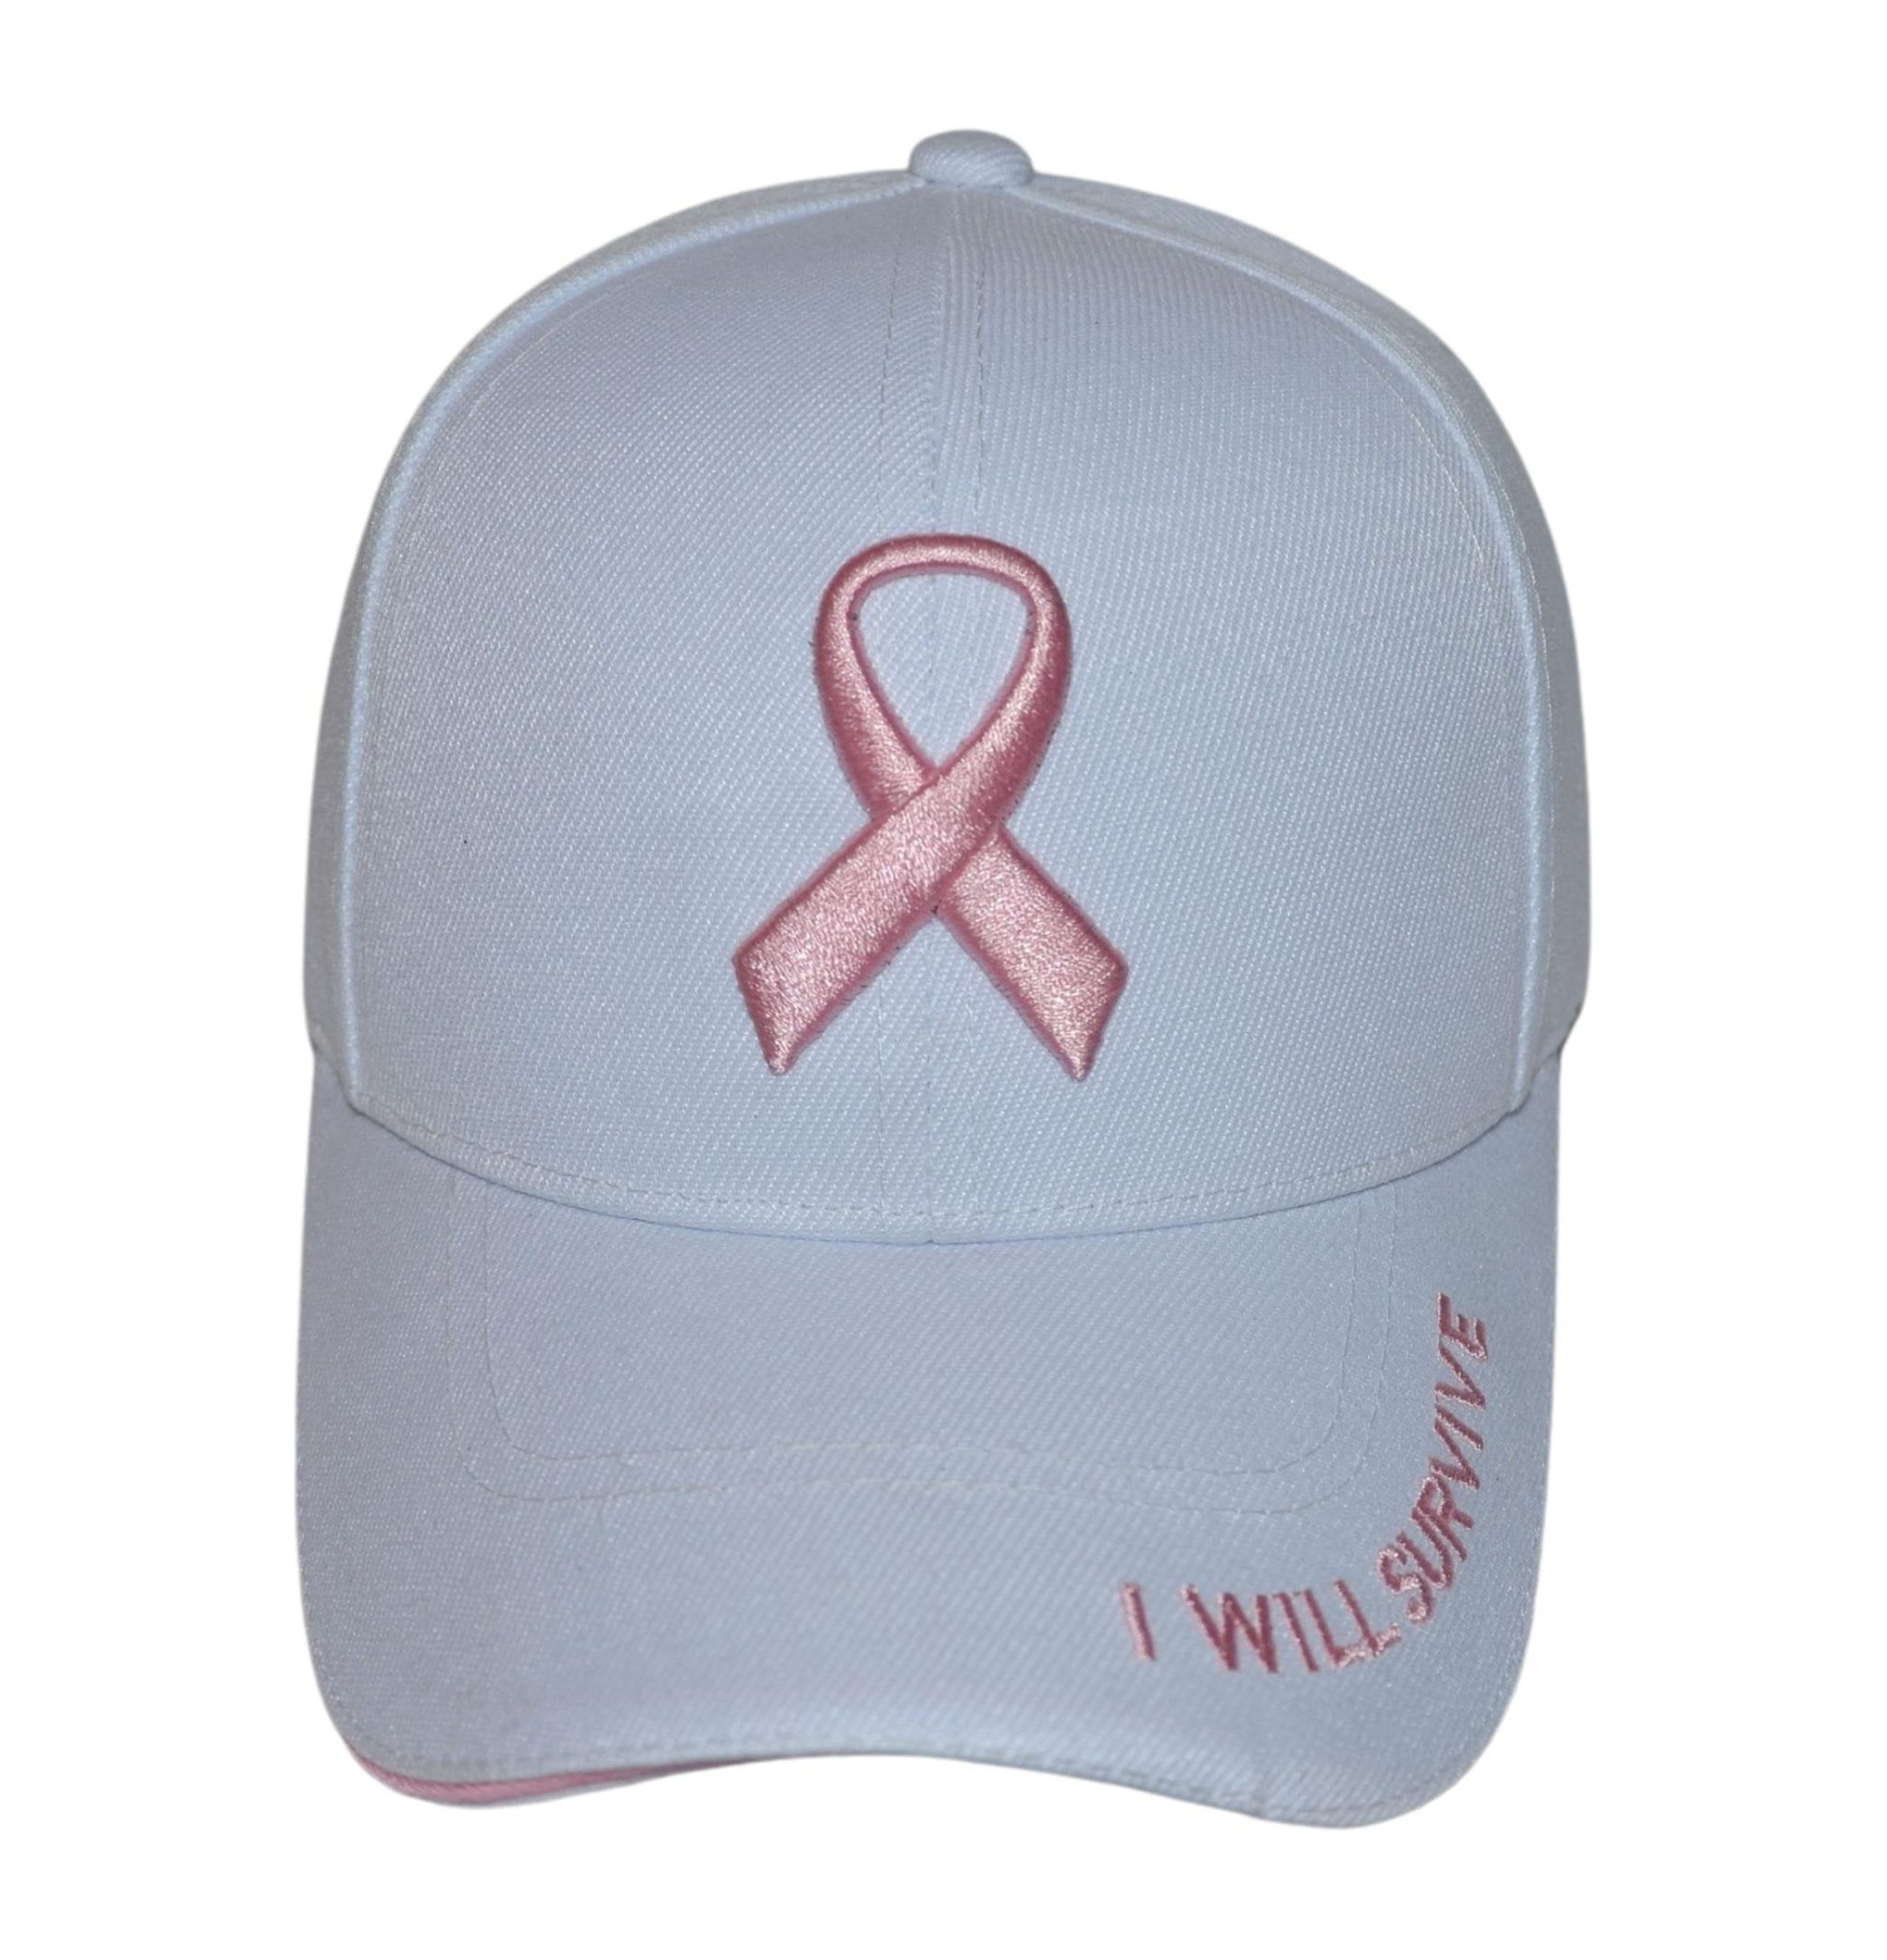 cancer hats